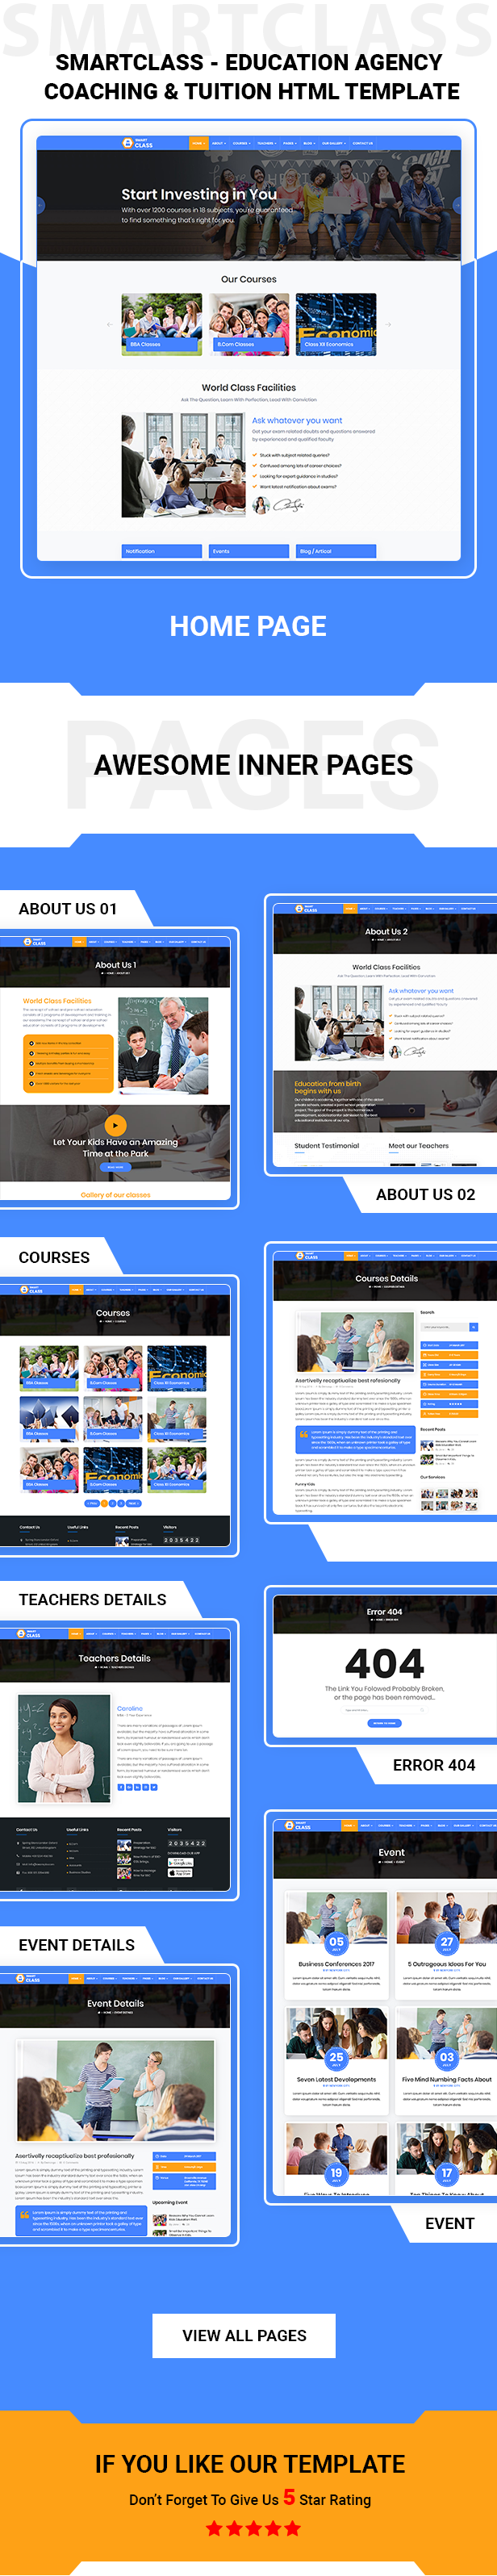 SmartClass | Education Agency Coaching & Tuition HTML Template - 1